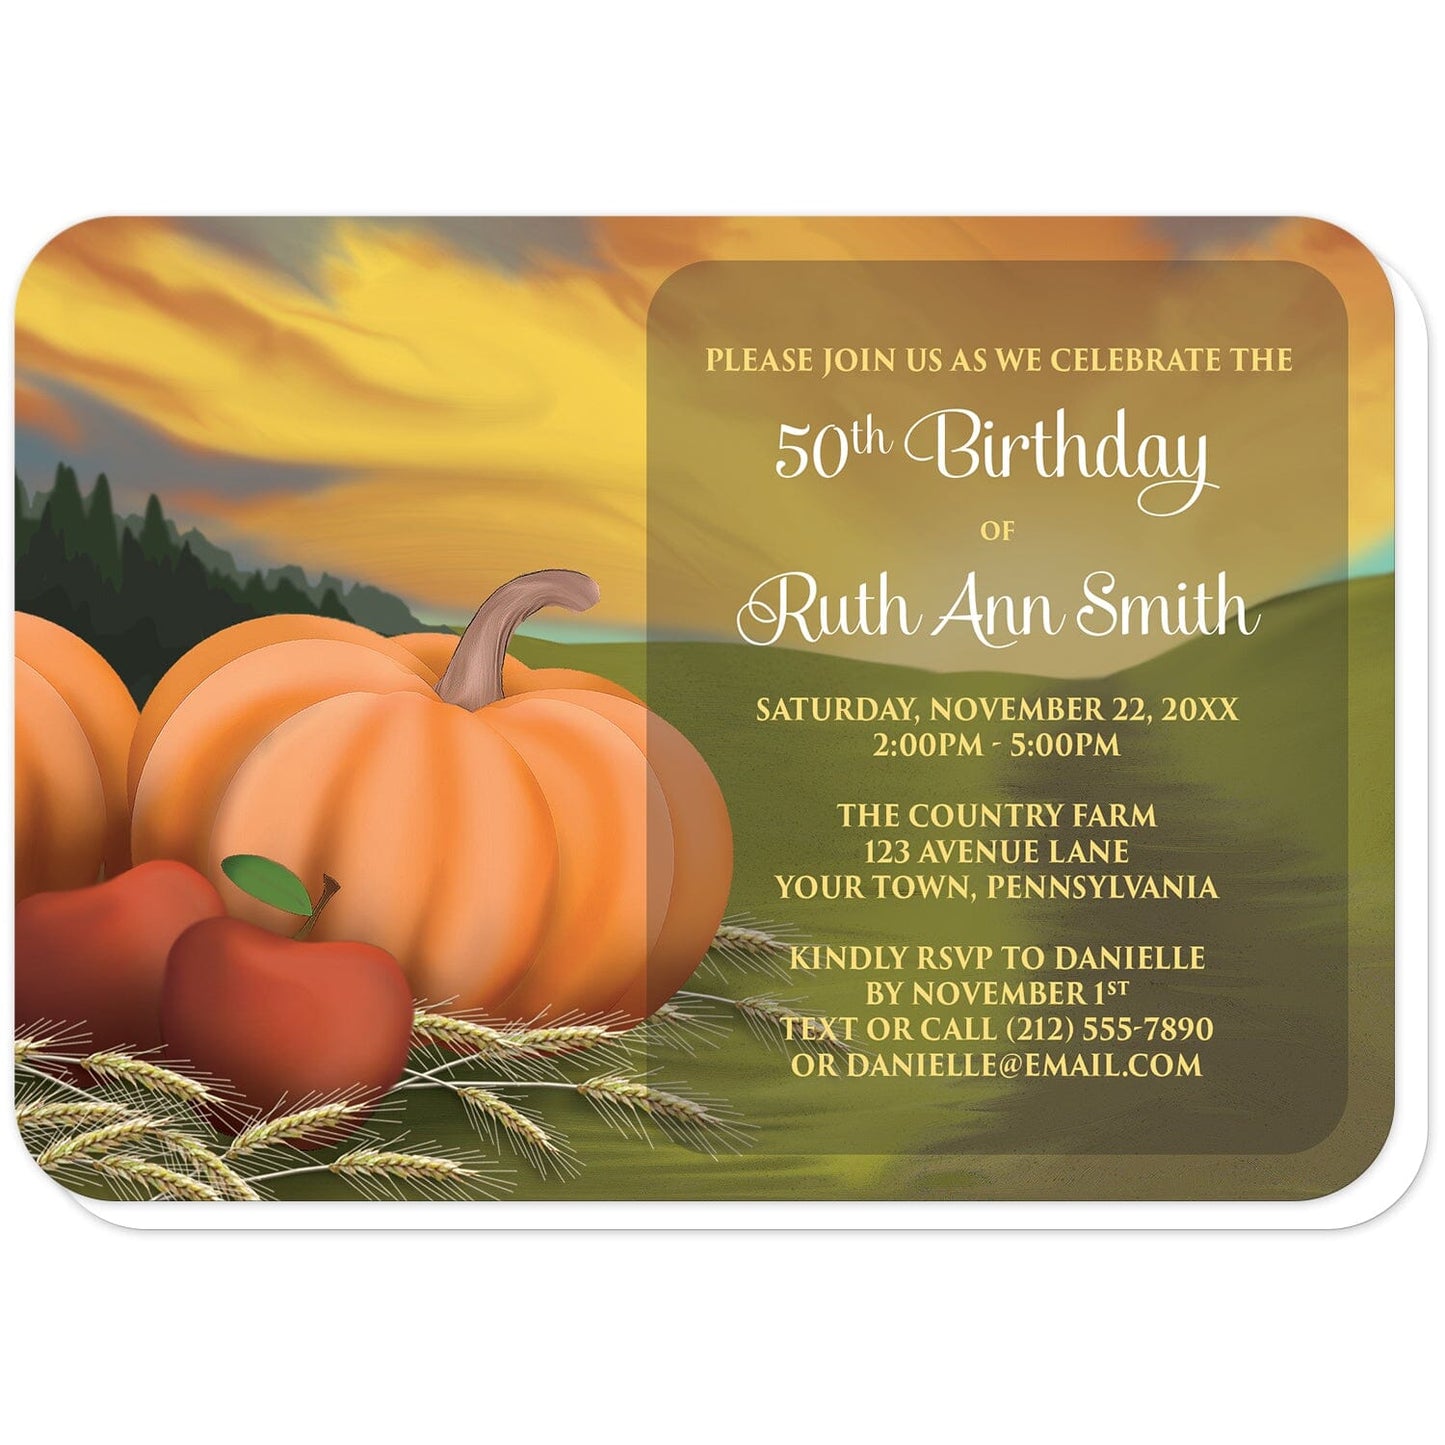 Country Autumn Harvest Birthday Party Invitations (with rounded corners) at Artistically Invited. Country autumn harvest birthday party invitations designed with pumpkins, apples, and hay stems in a country farm or open fields illustration. Your personalized birthday details are custom printed in white and yellow over a darker area over the scene to the right of the harvest. This rustic design is perfect for adult birthdays for men or women during the fall months.